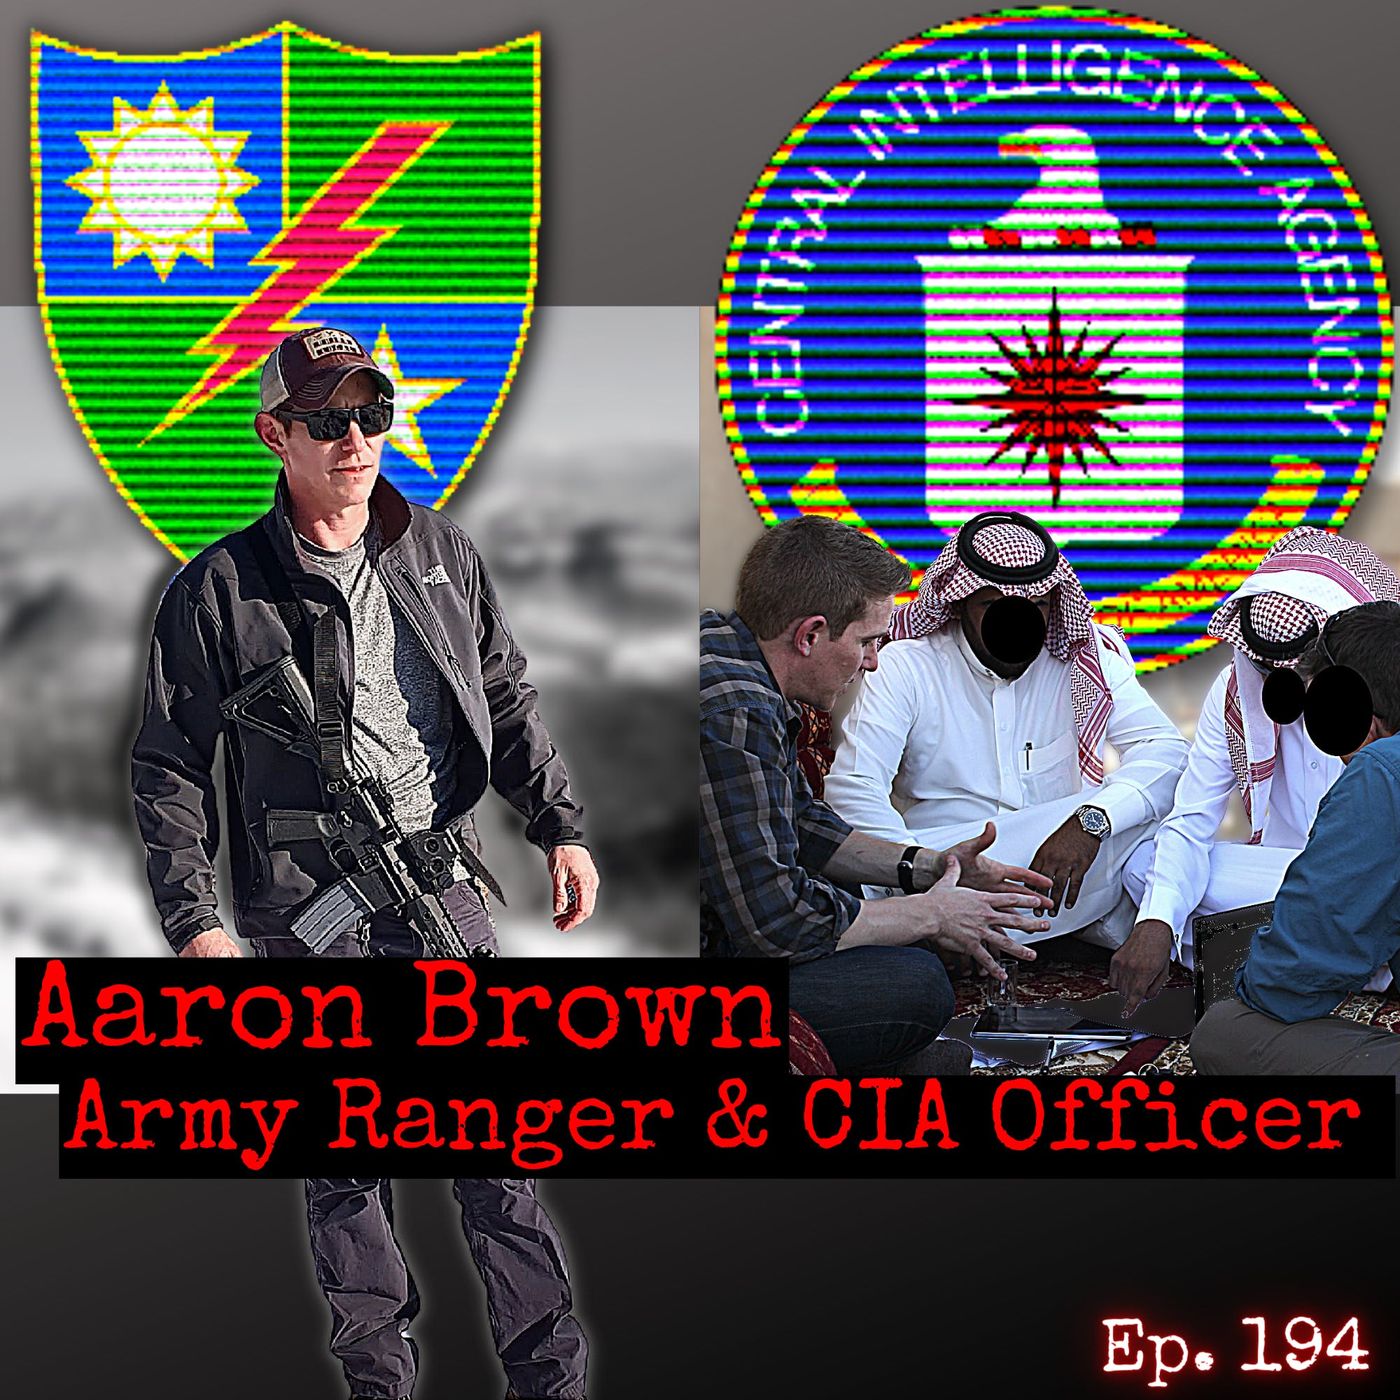 From the Ranger Regiment to Planning the Bin Laden Raid at CIA | Aaron Brown | Ep. 194